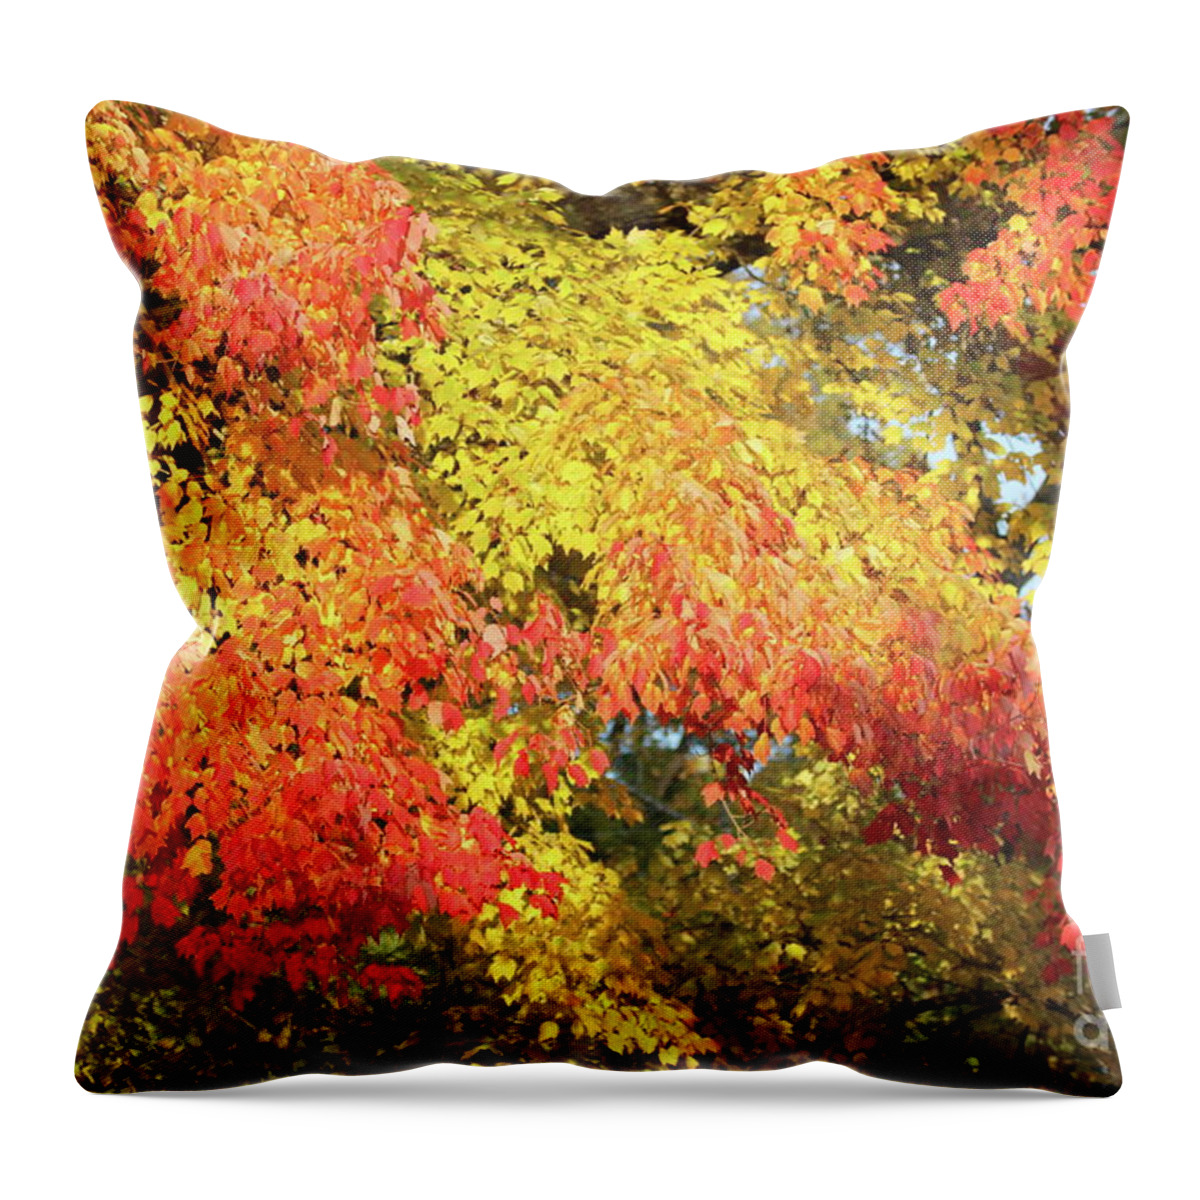 Reid Callaway Autumn Leaves Throw Pillow featuring the photograph Flaming Autumn Leaves Art by Reid Callaway